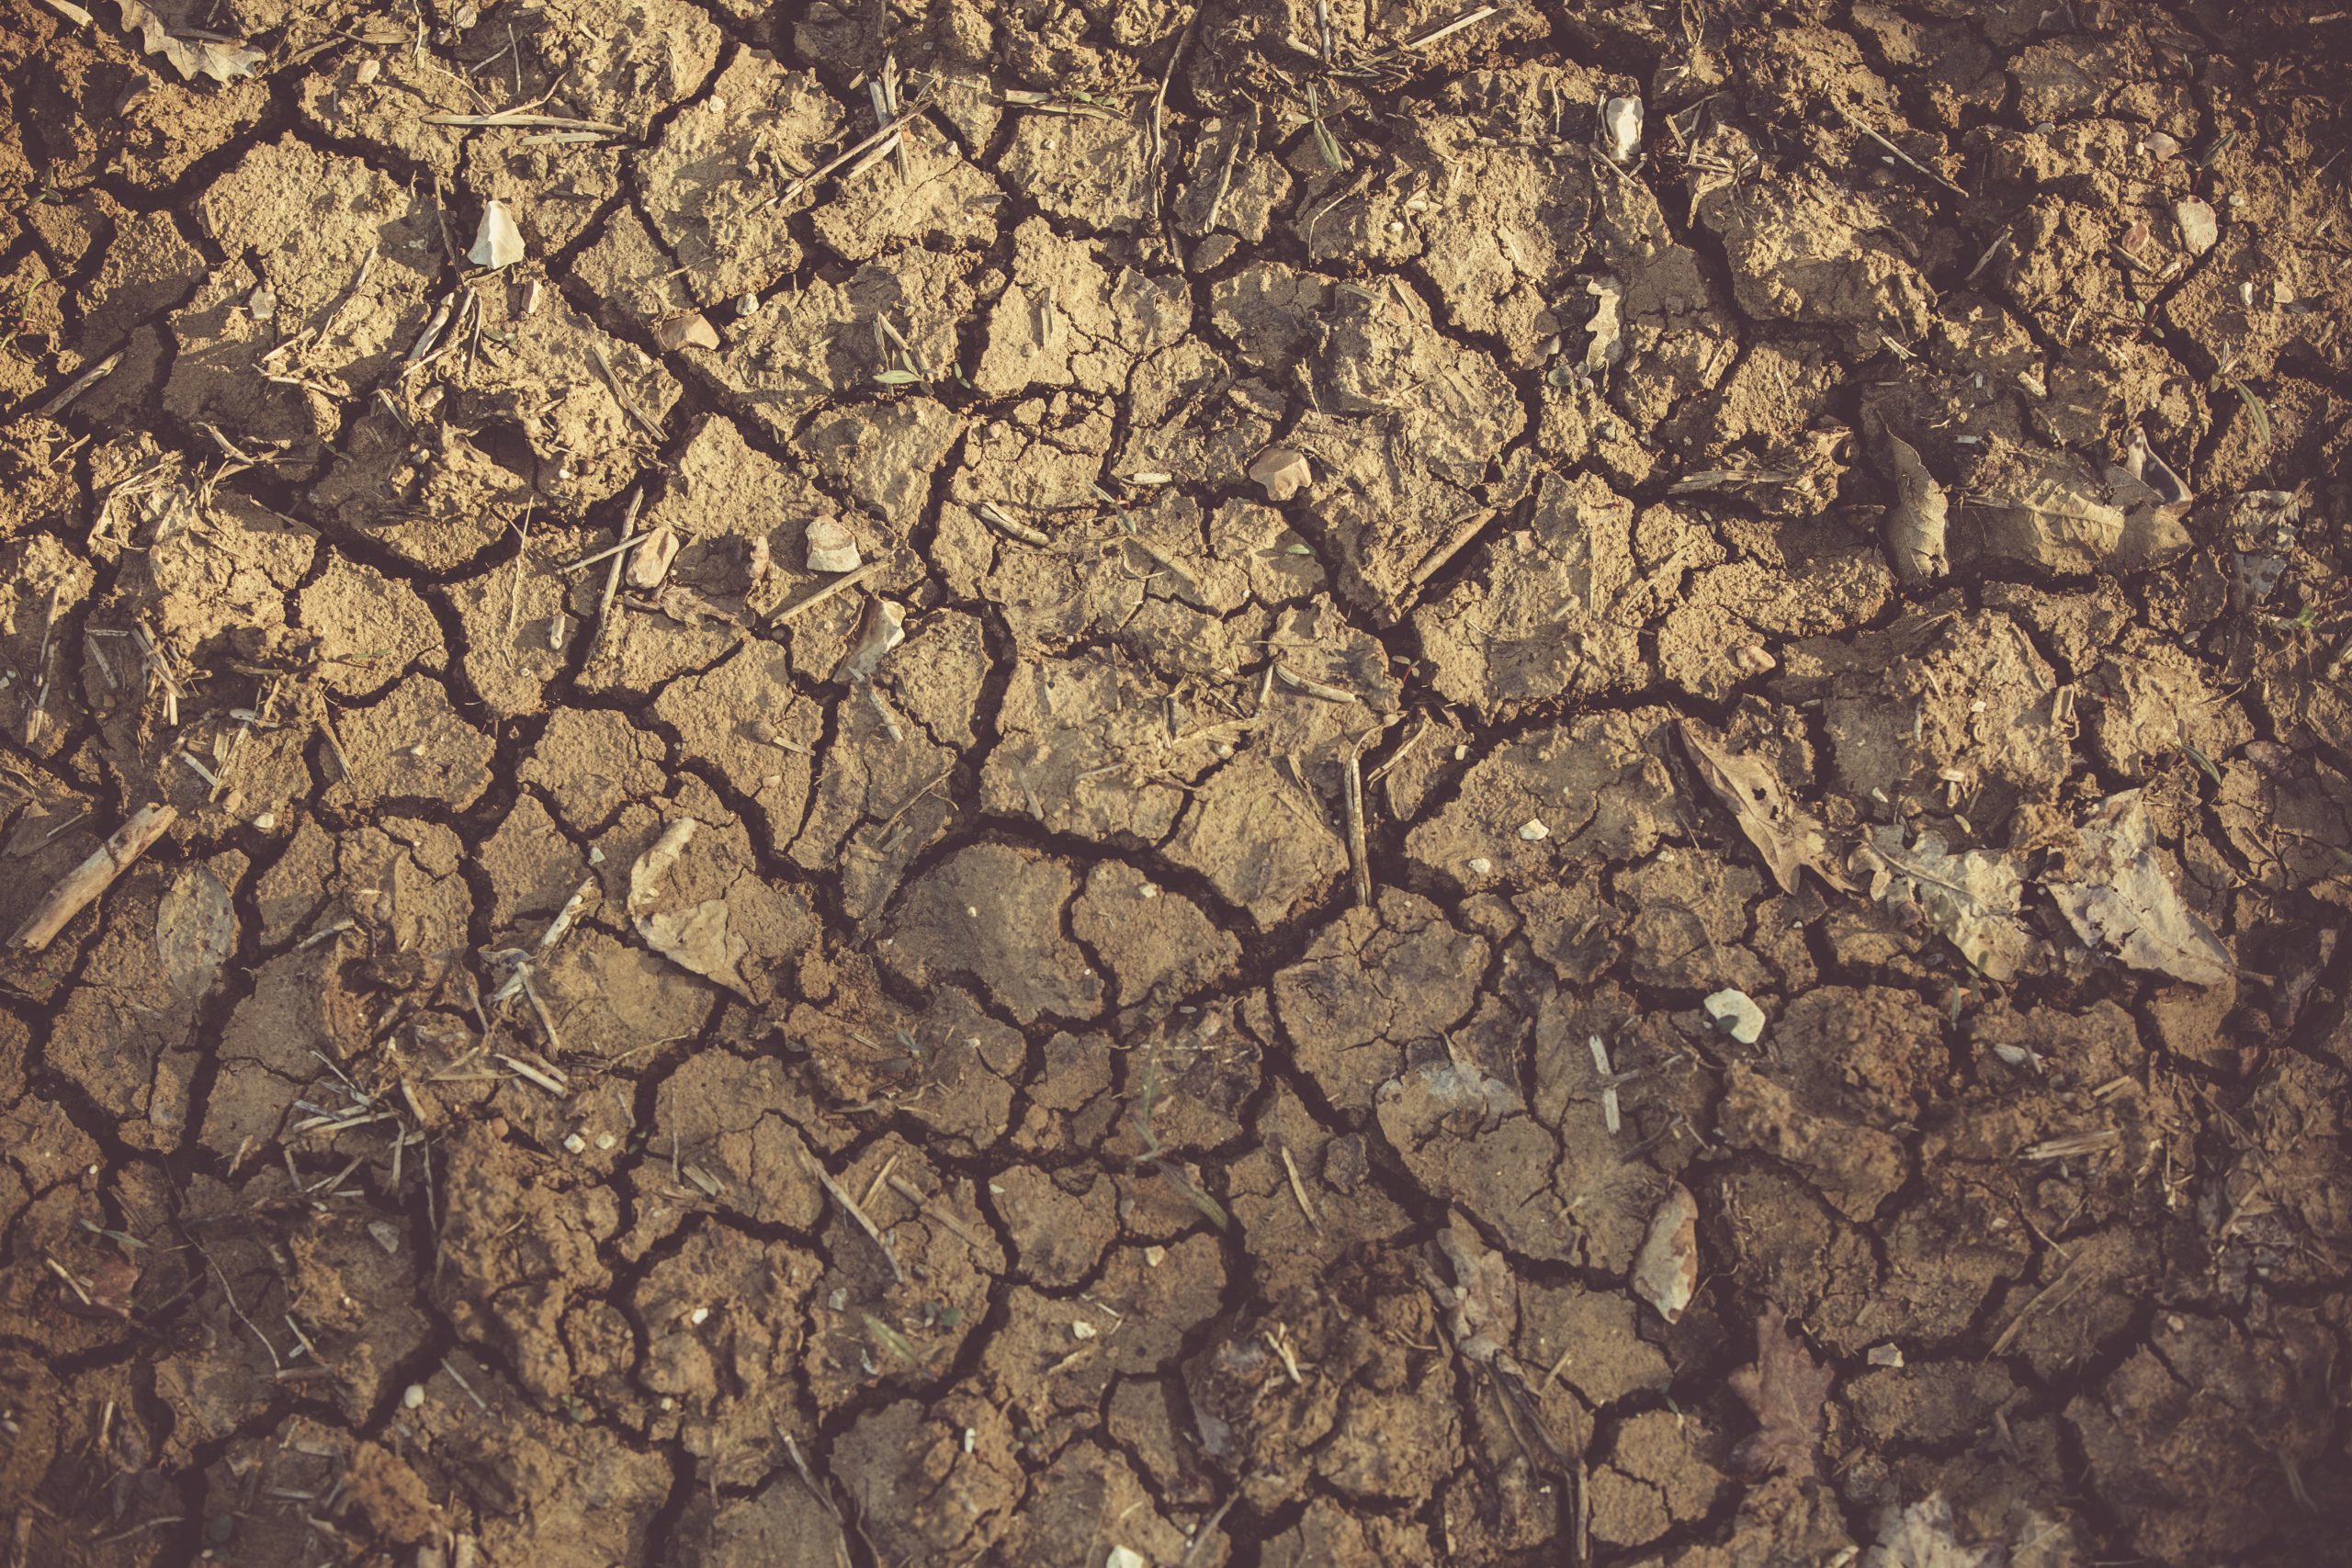 Strengthening drought resilience through satellite data and analytics